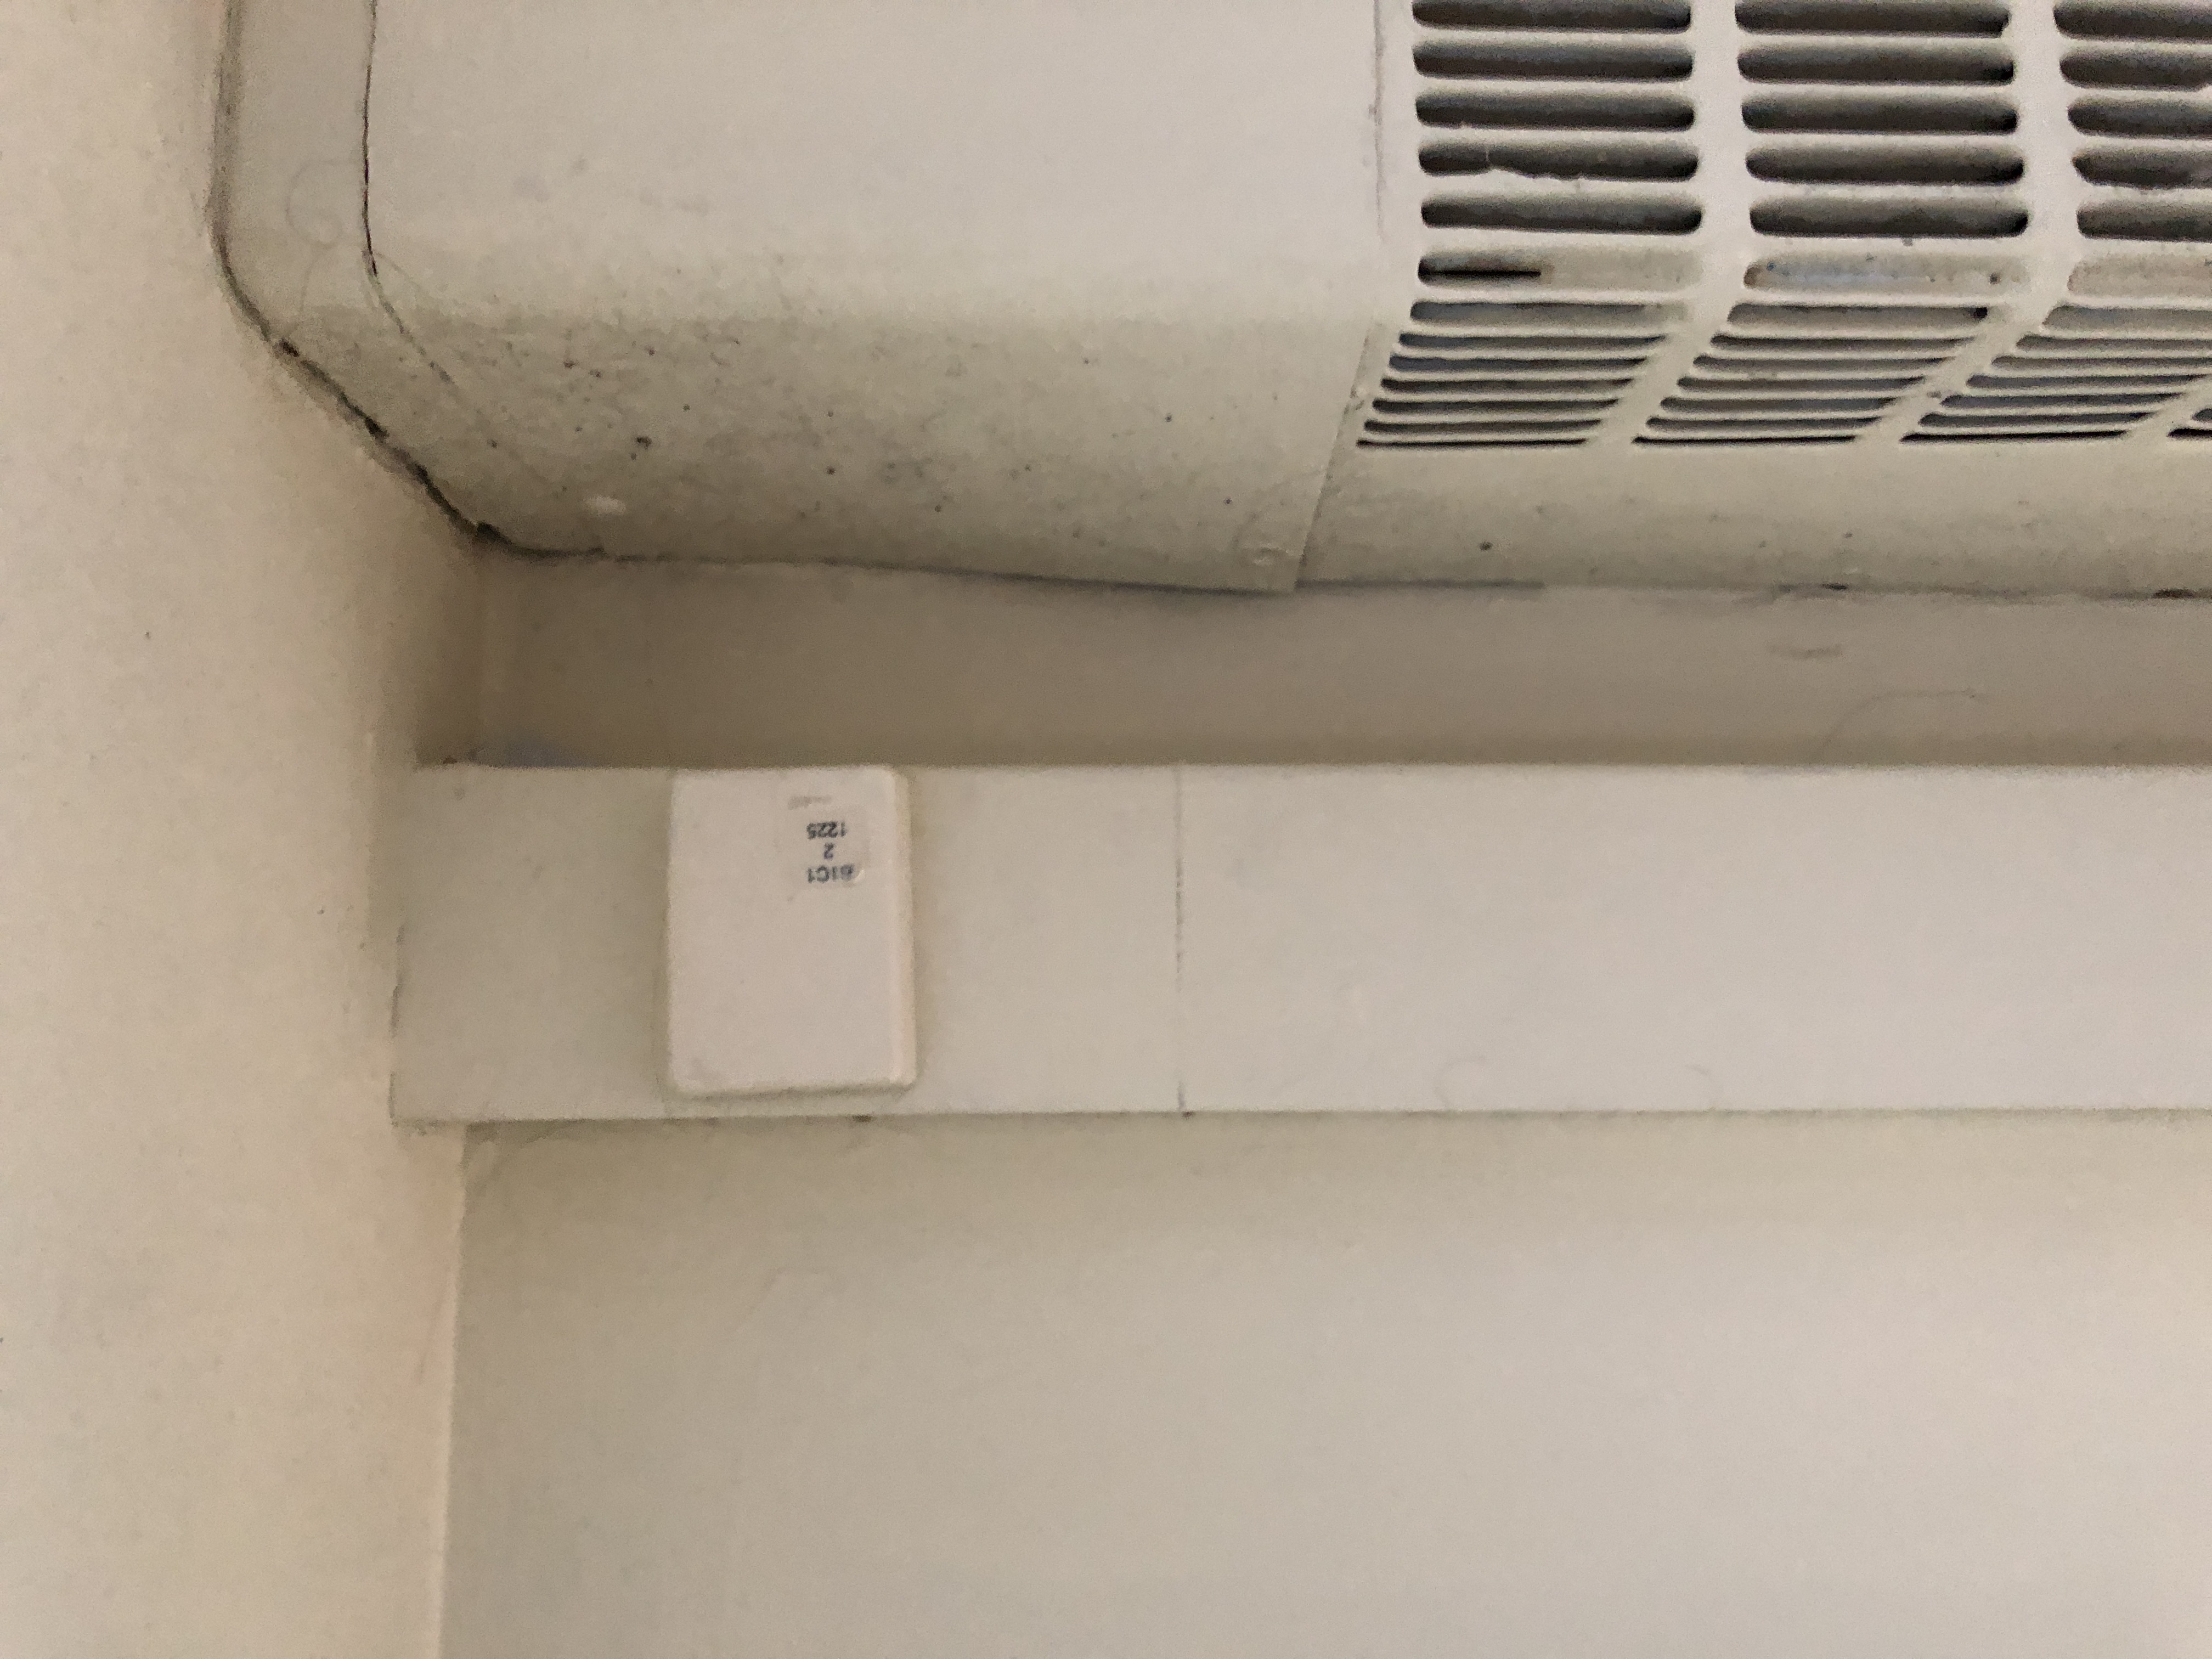 network connection above heater